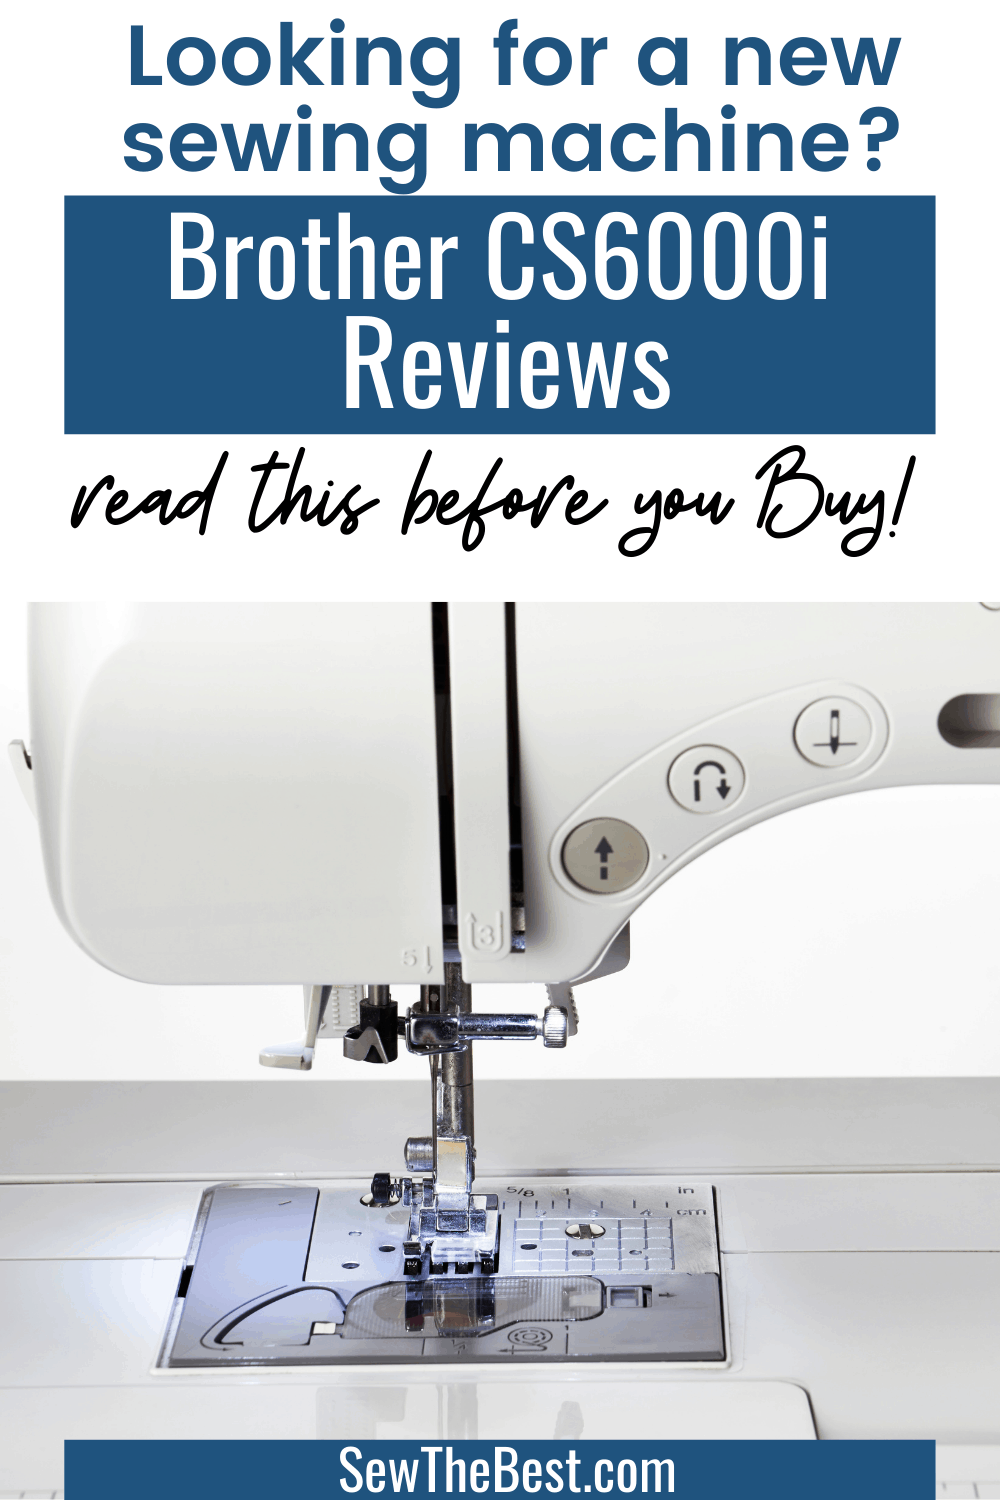 Brother CS6000i Sewing Machine Review